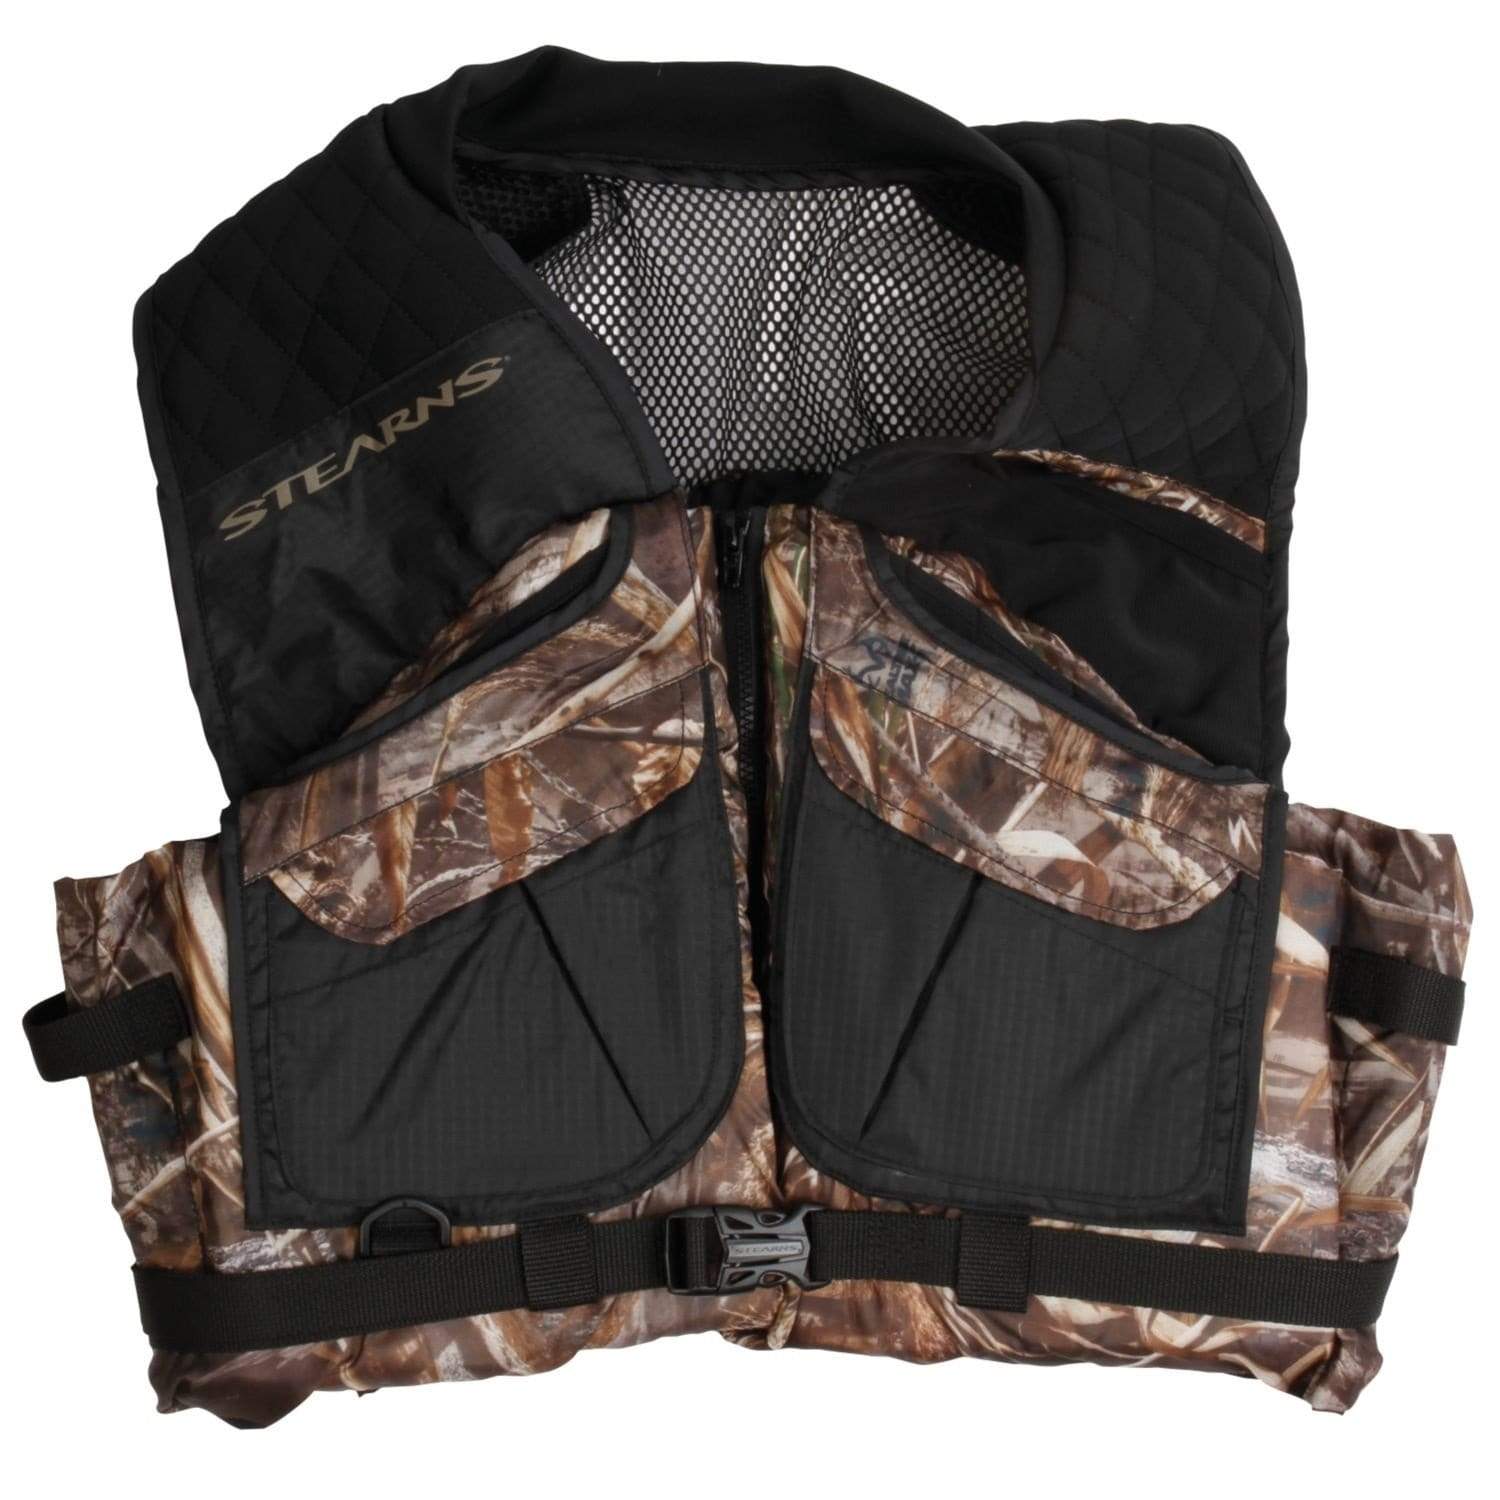 Stearns Marine/Water Sports : Lifevests Stearns Pfd Adult Comfort Series Max-5 Camo Vest Small